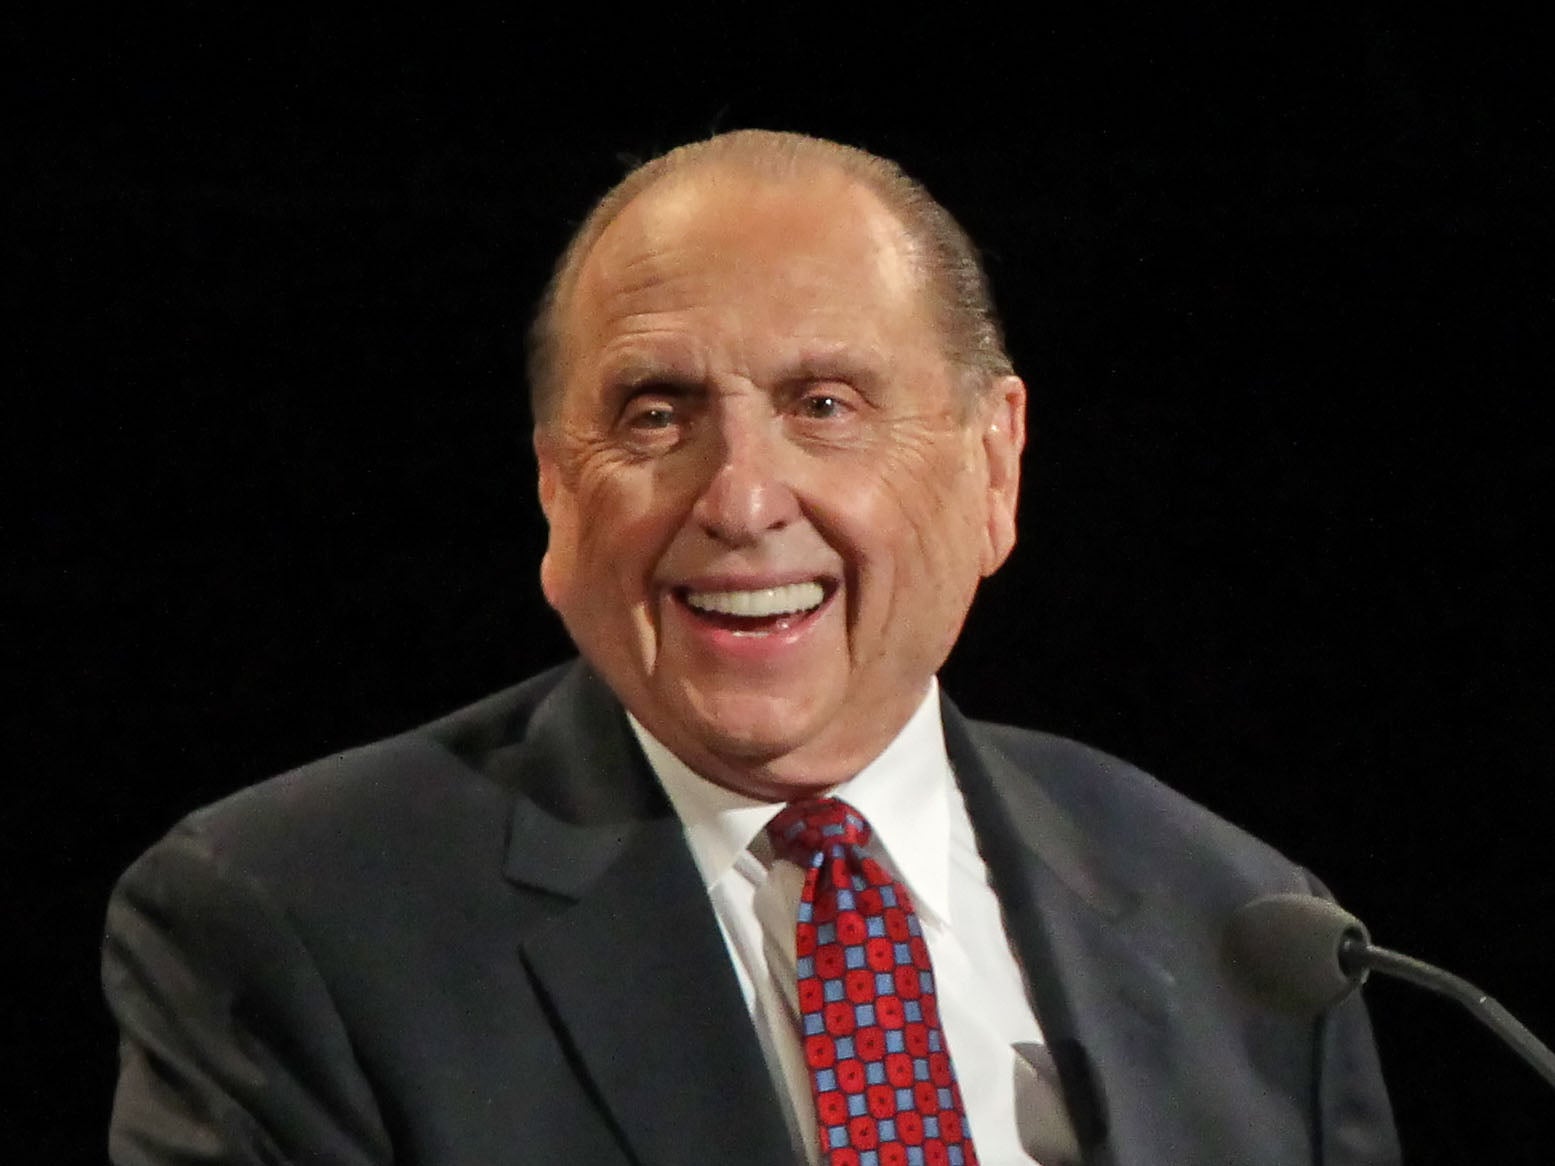 Under Monson the Mormon Church distanced itself from the Boy Scouts of America after the latter decided to permit gay and transgender members